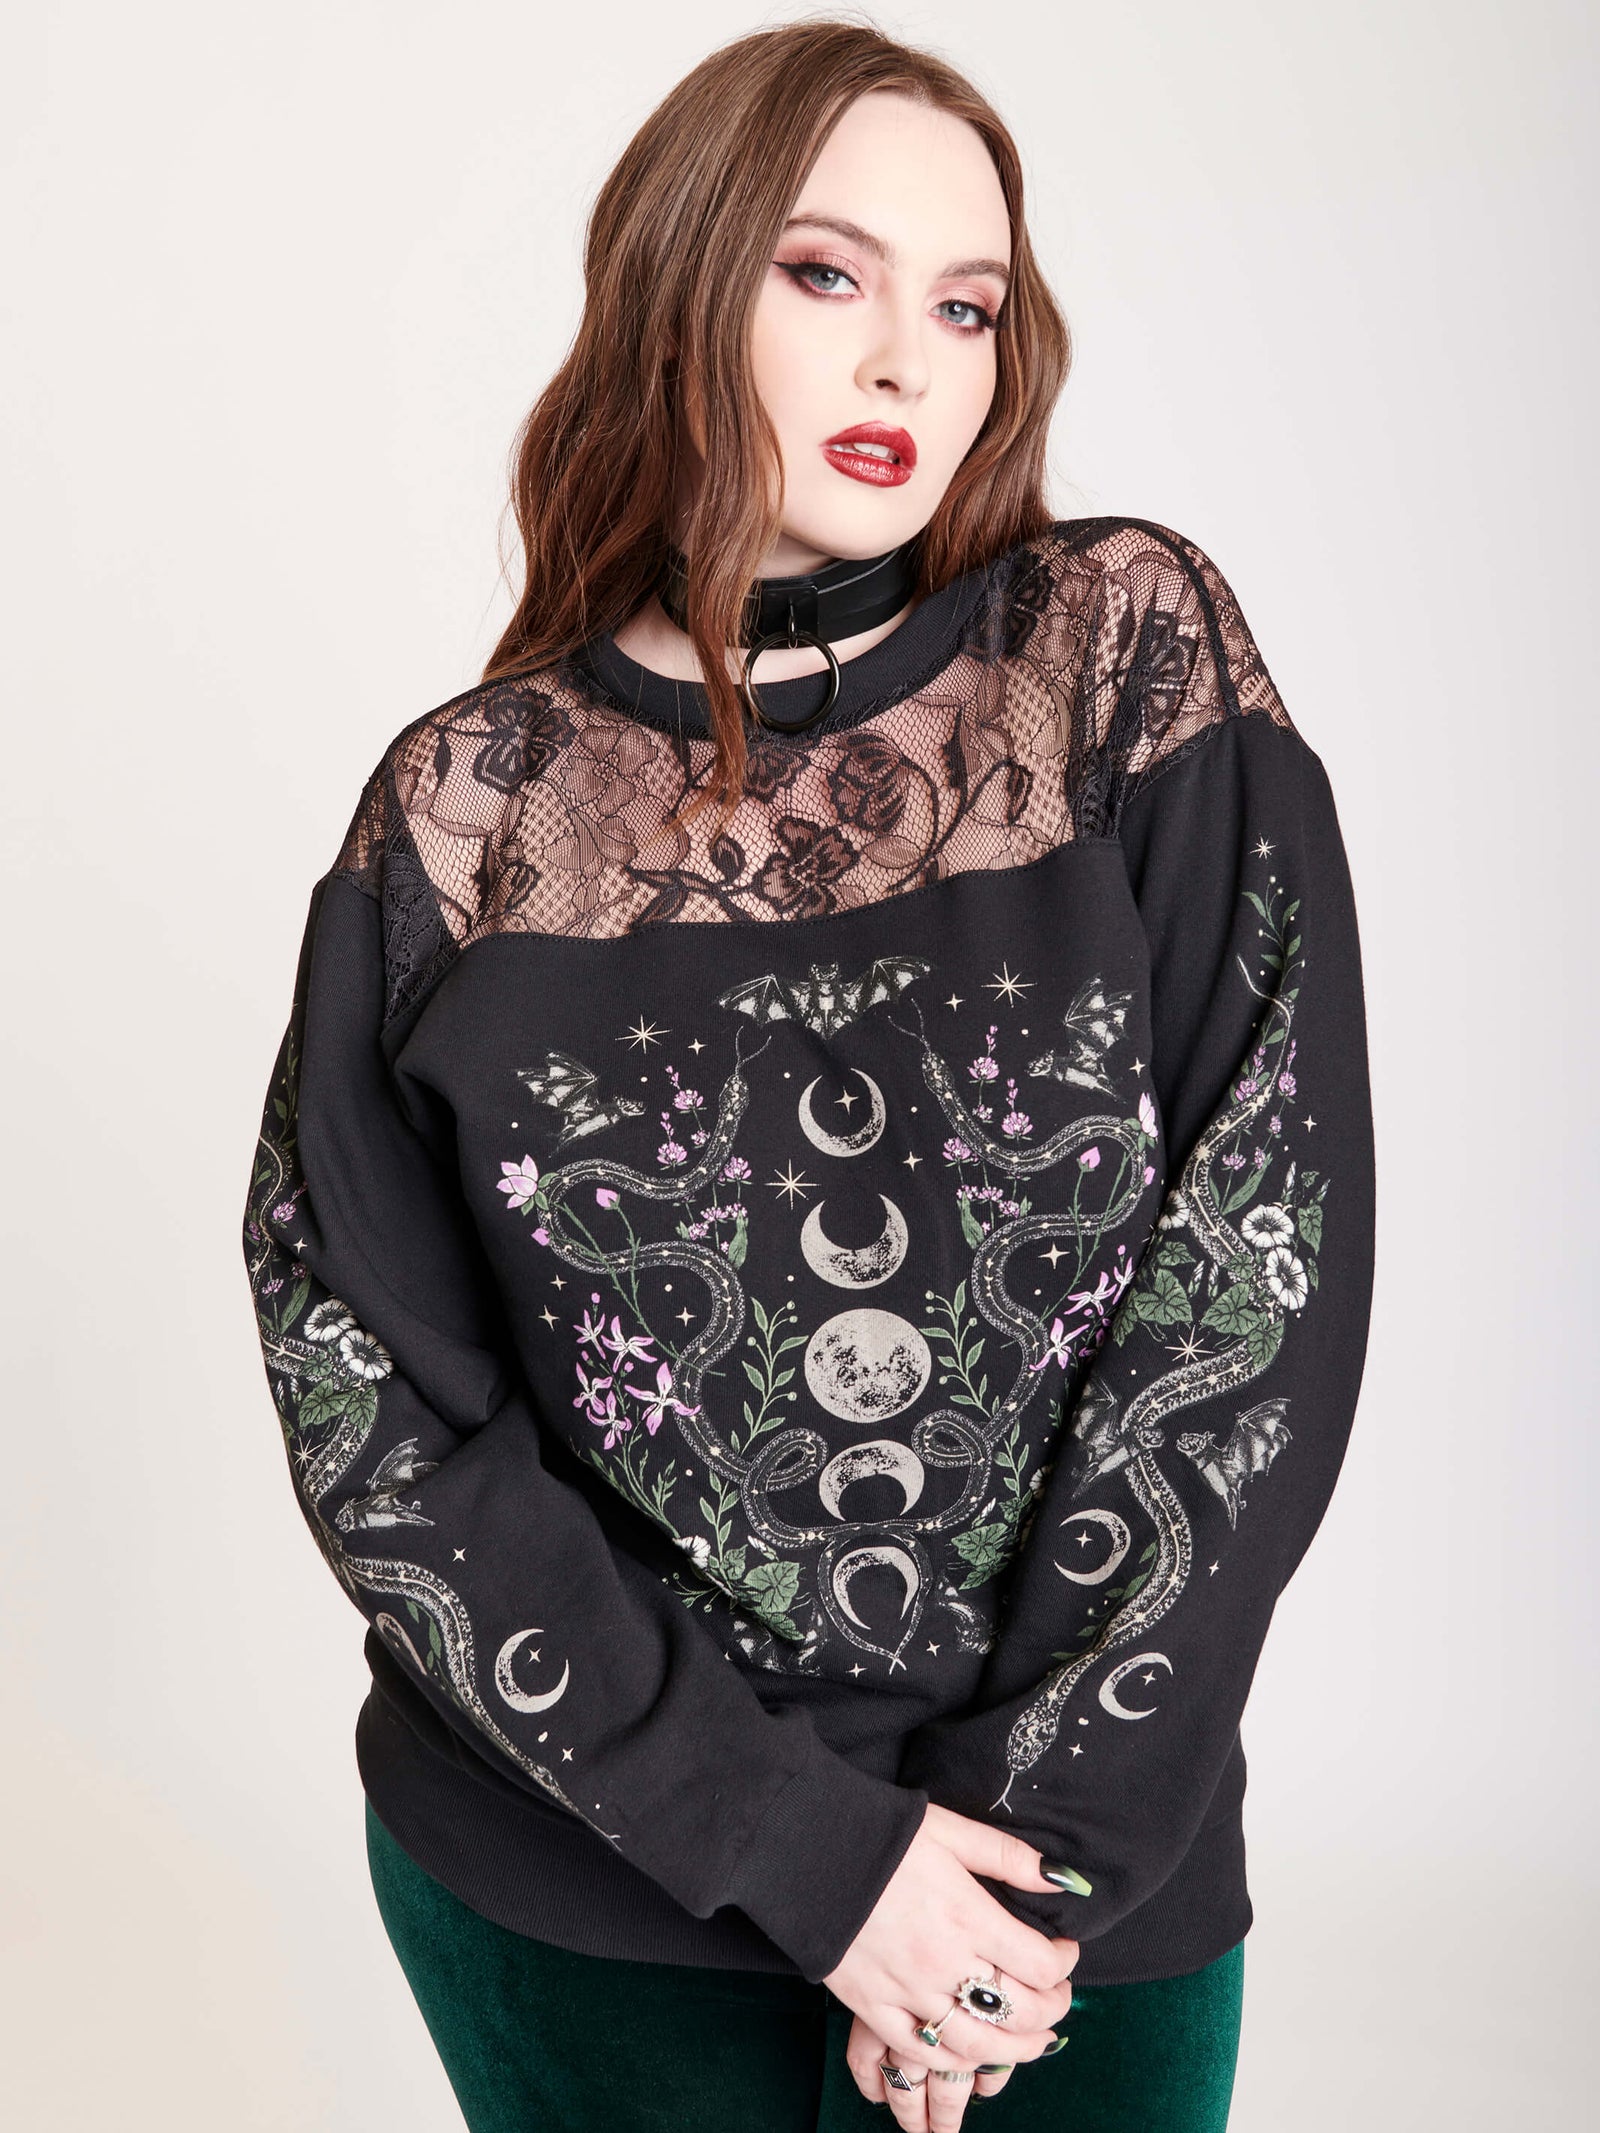 Plus Size Goth Clothes & Alternative Clothing  Midnight Hour Tagged long  sleeve - plus size